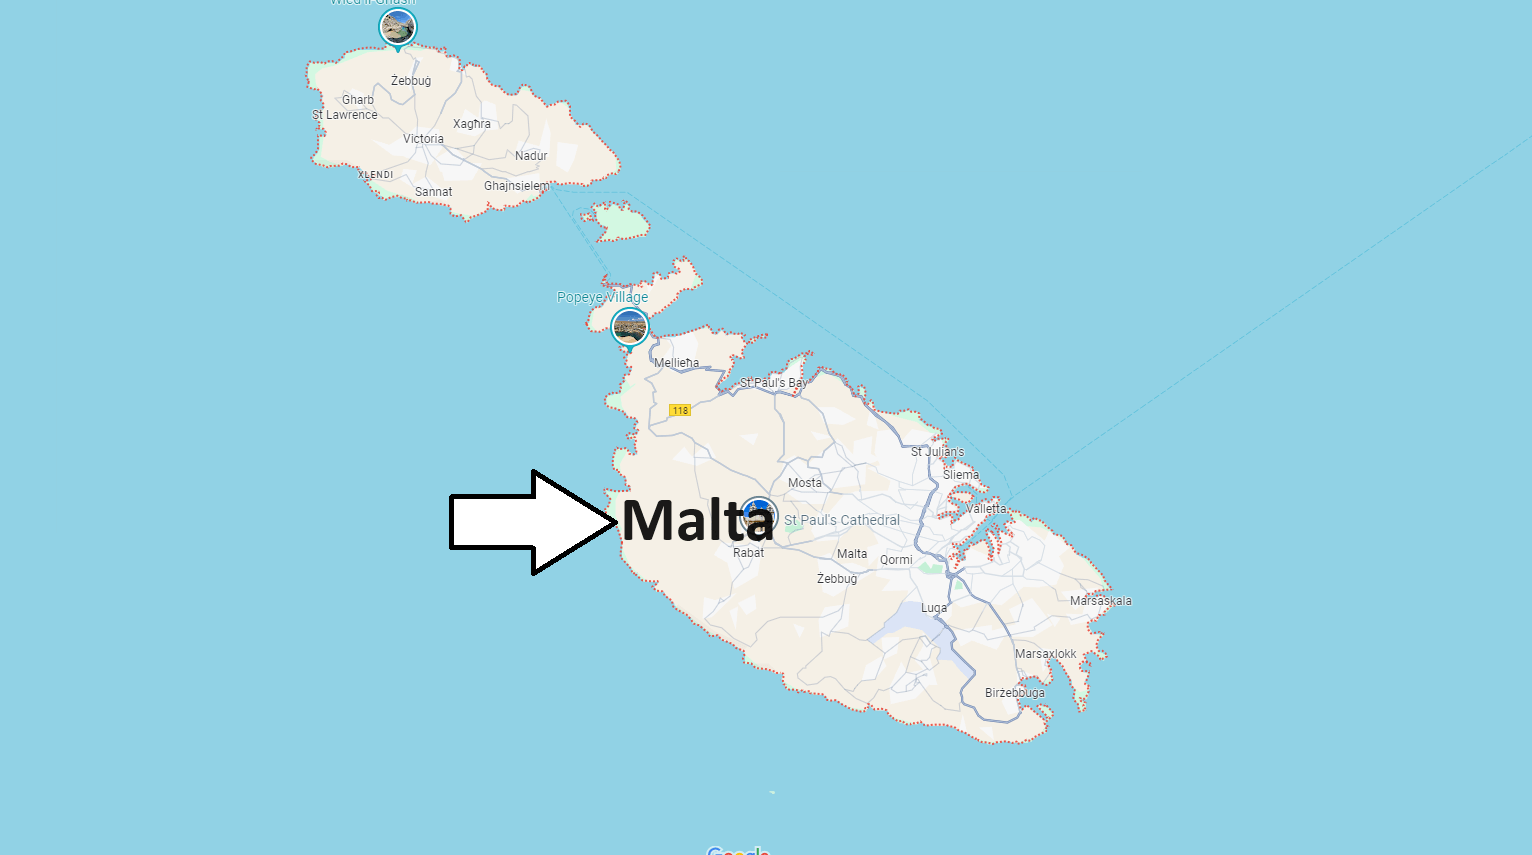 Is Malta in Italy or Greece